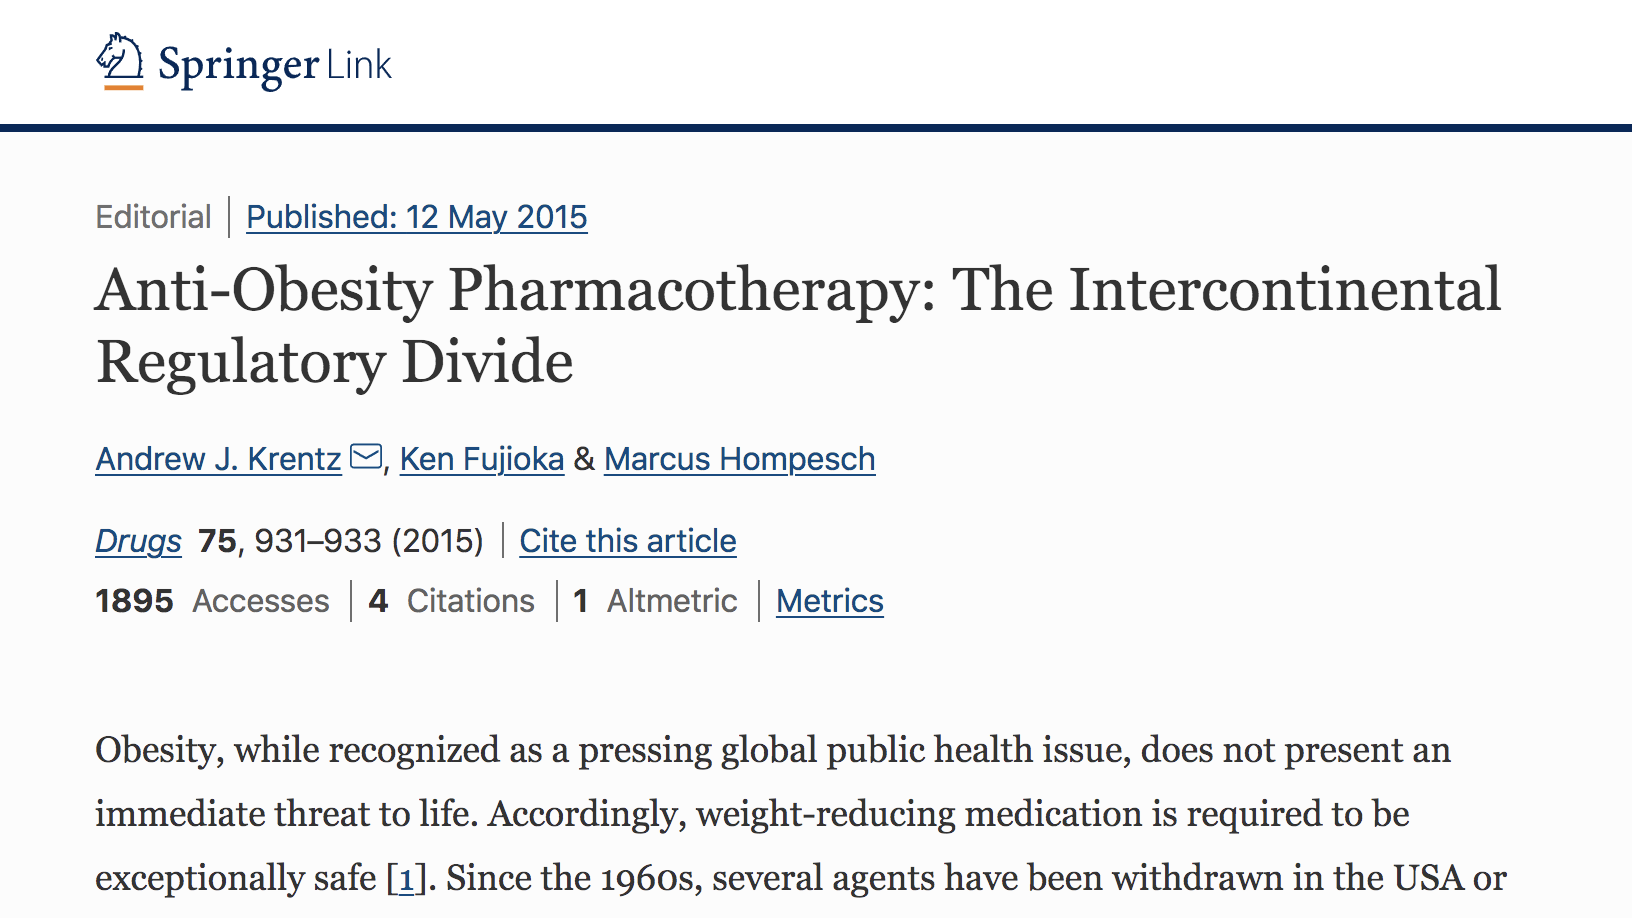 Anti-Obesity Pharmacotherapy: The Intercontinental Regulatory Divide thumbnail